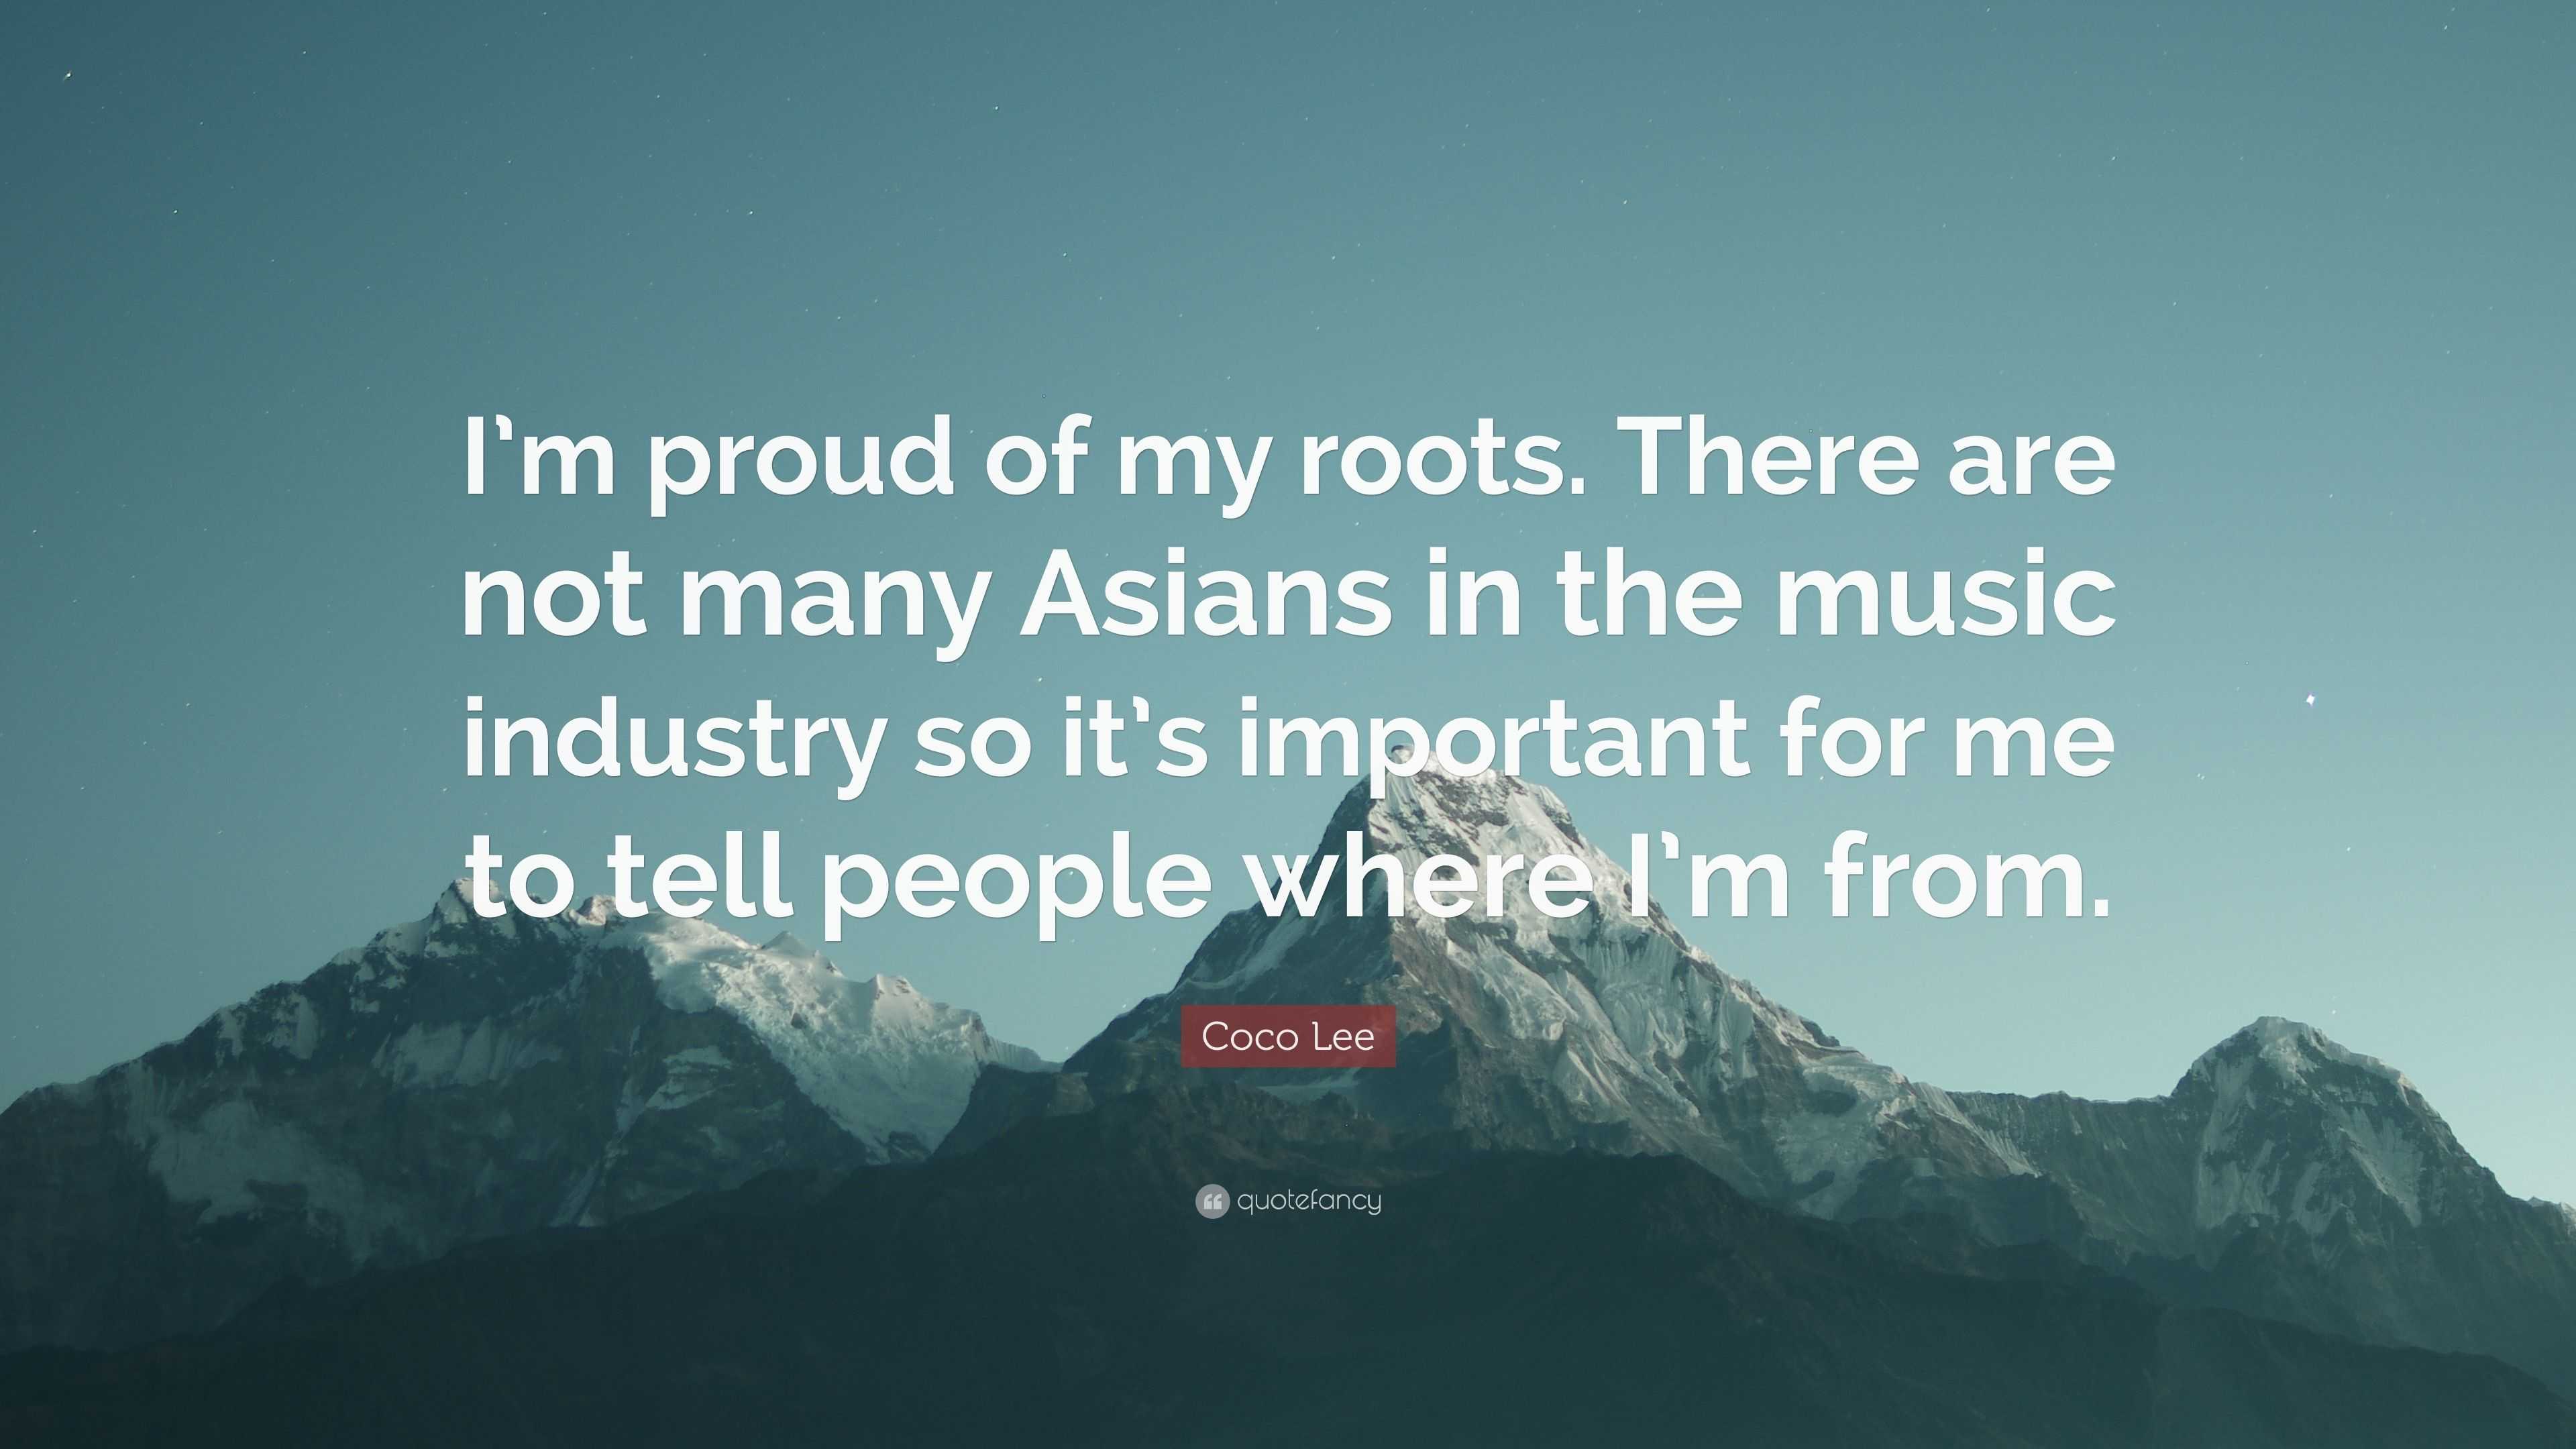 Coco Lee Quote: “I'm proud of my roots. There are not many Asians in the  music industry so it's important for me to tell people where I'm...”